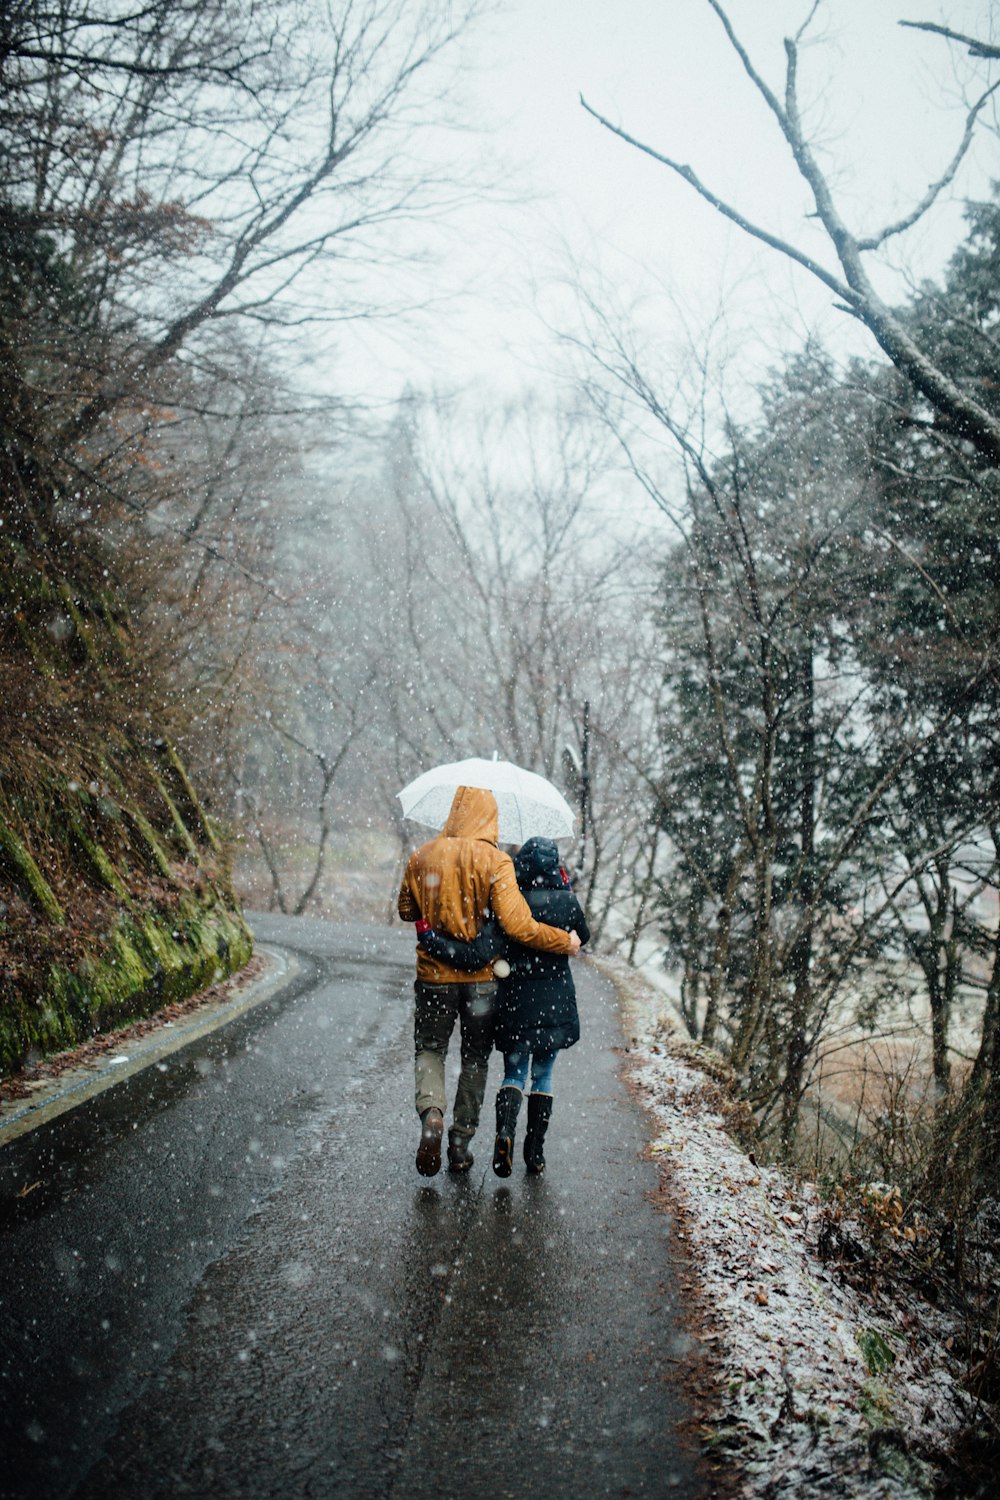 Man And Woman Walking In The Rain While Holding Umbrella Photo